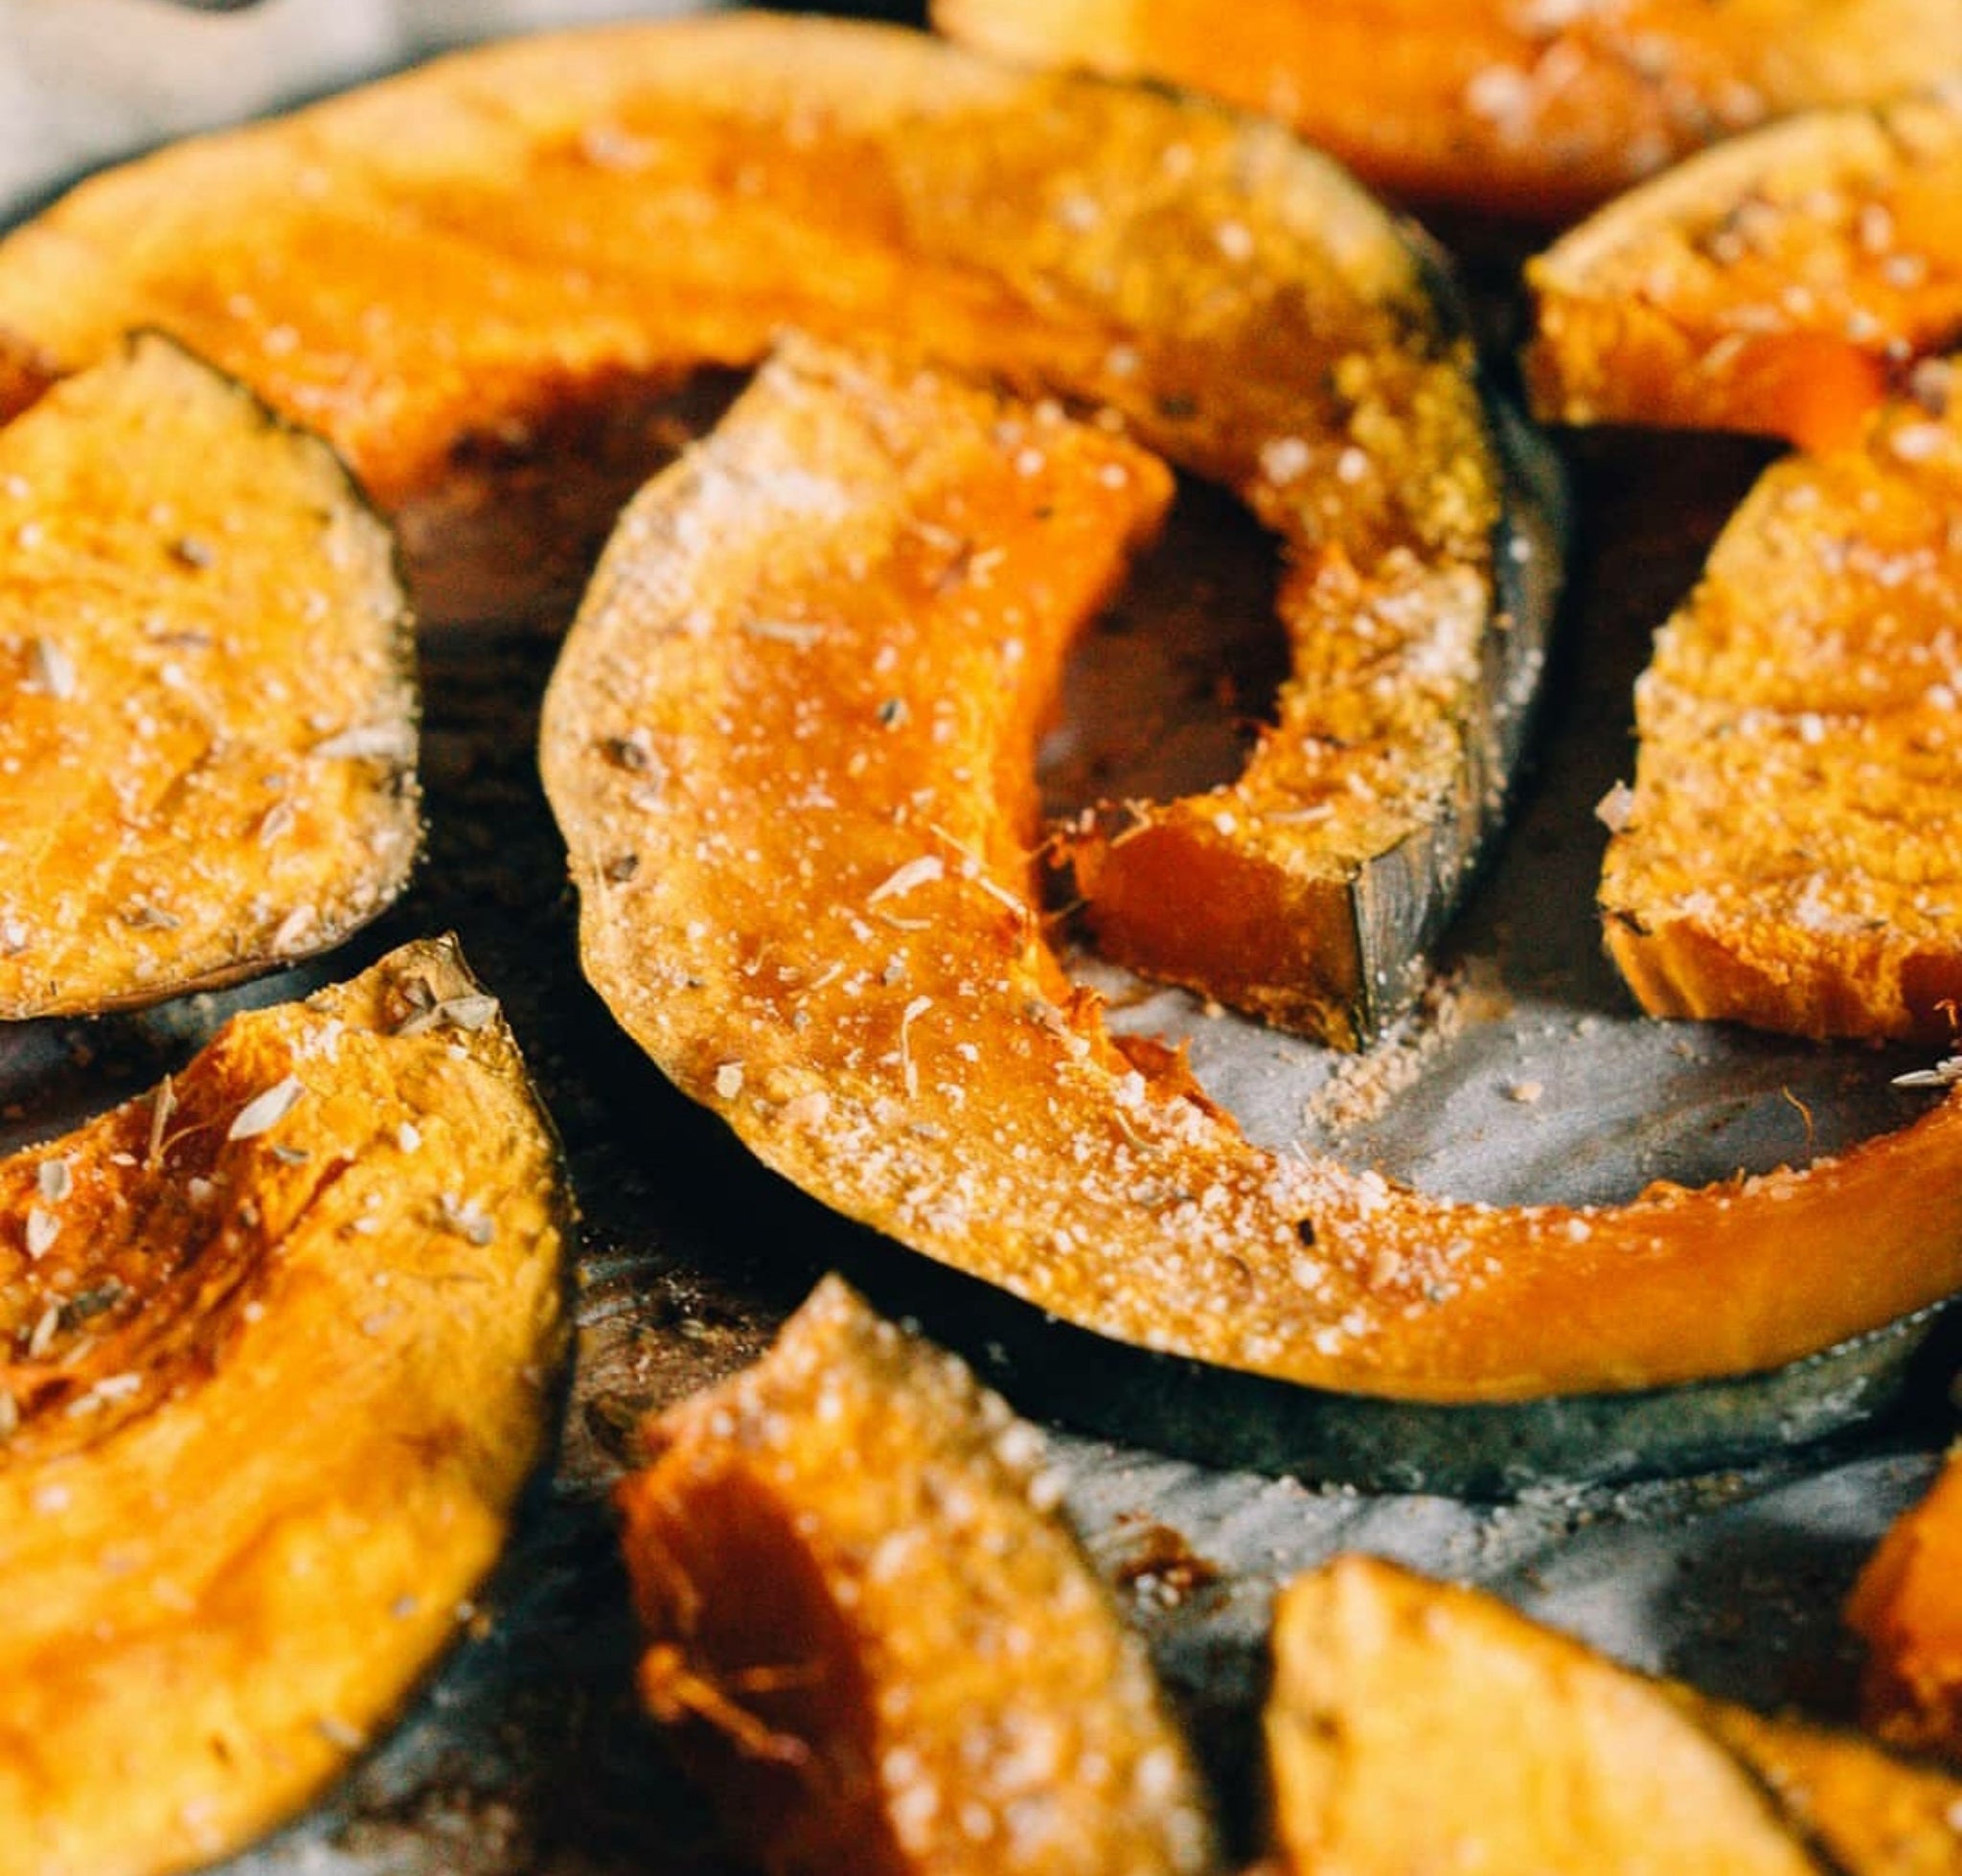 Roasted squash with parmesan with spices on a baking sheet close-up